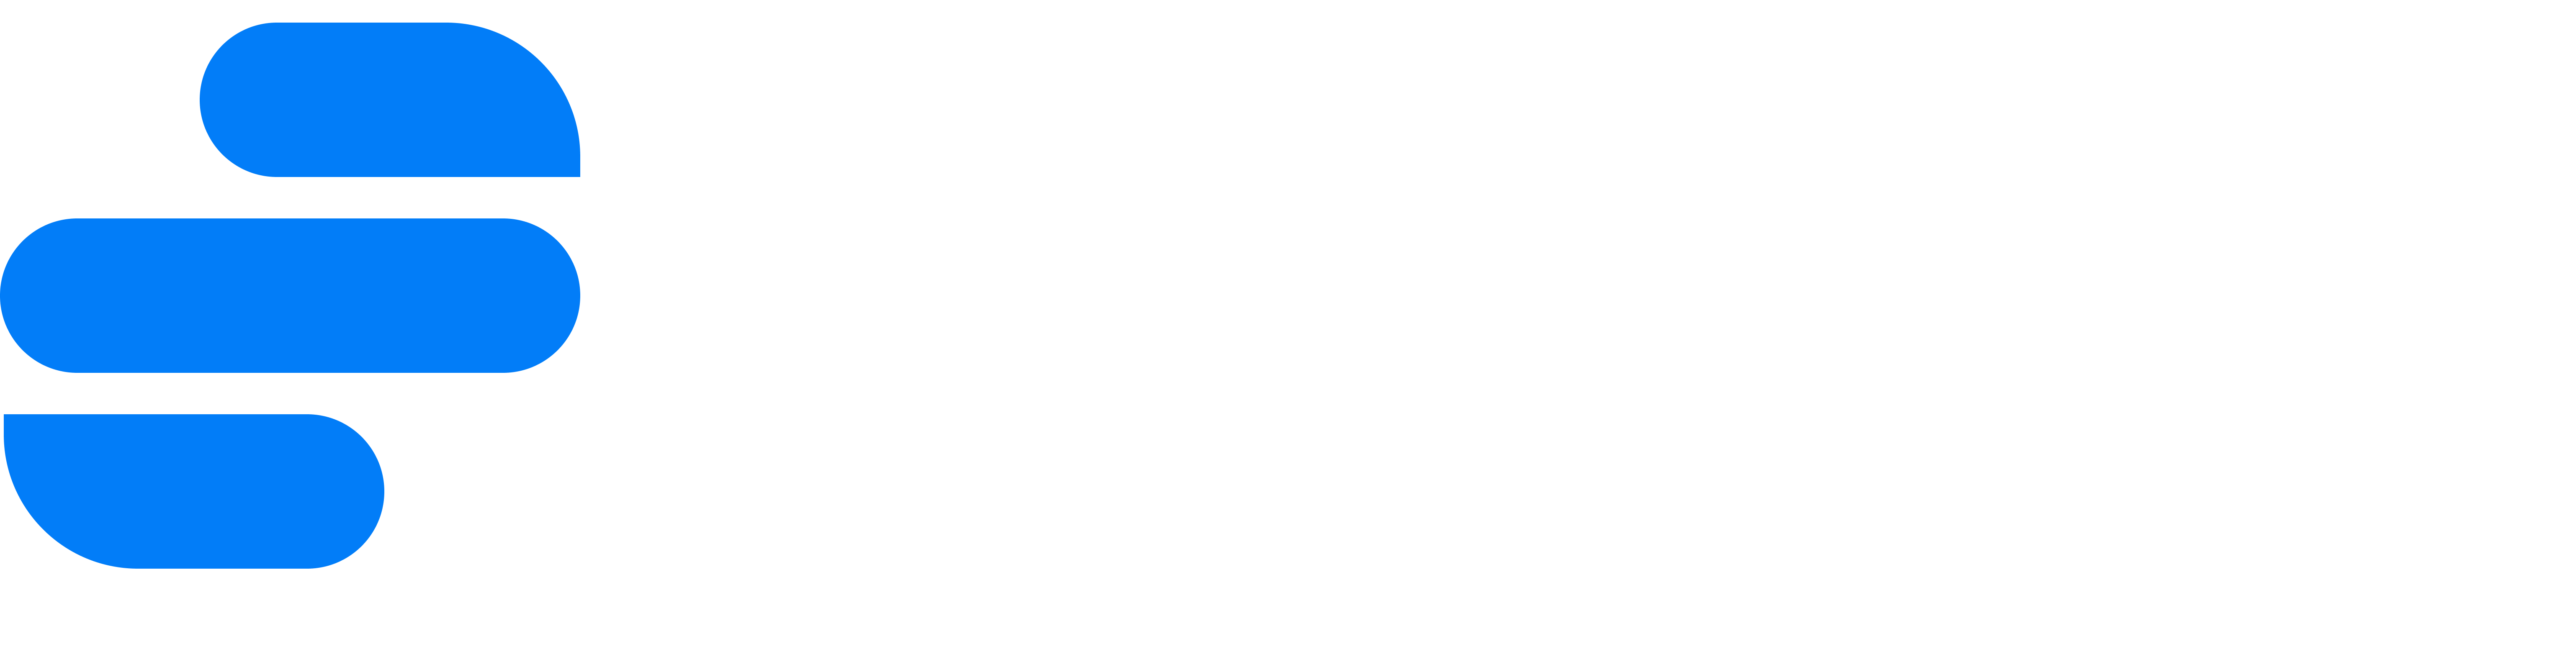 Systematic Sports Logo